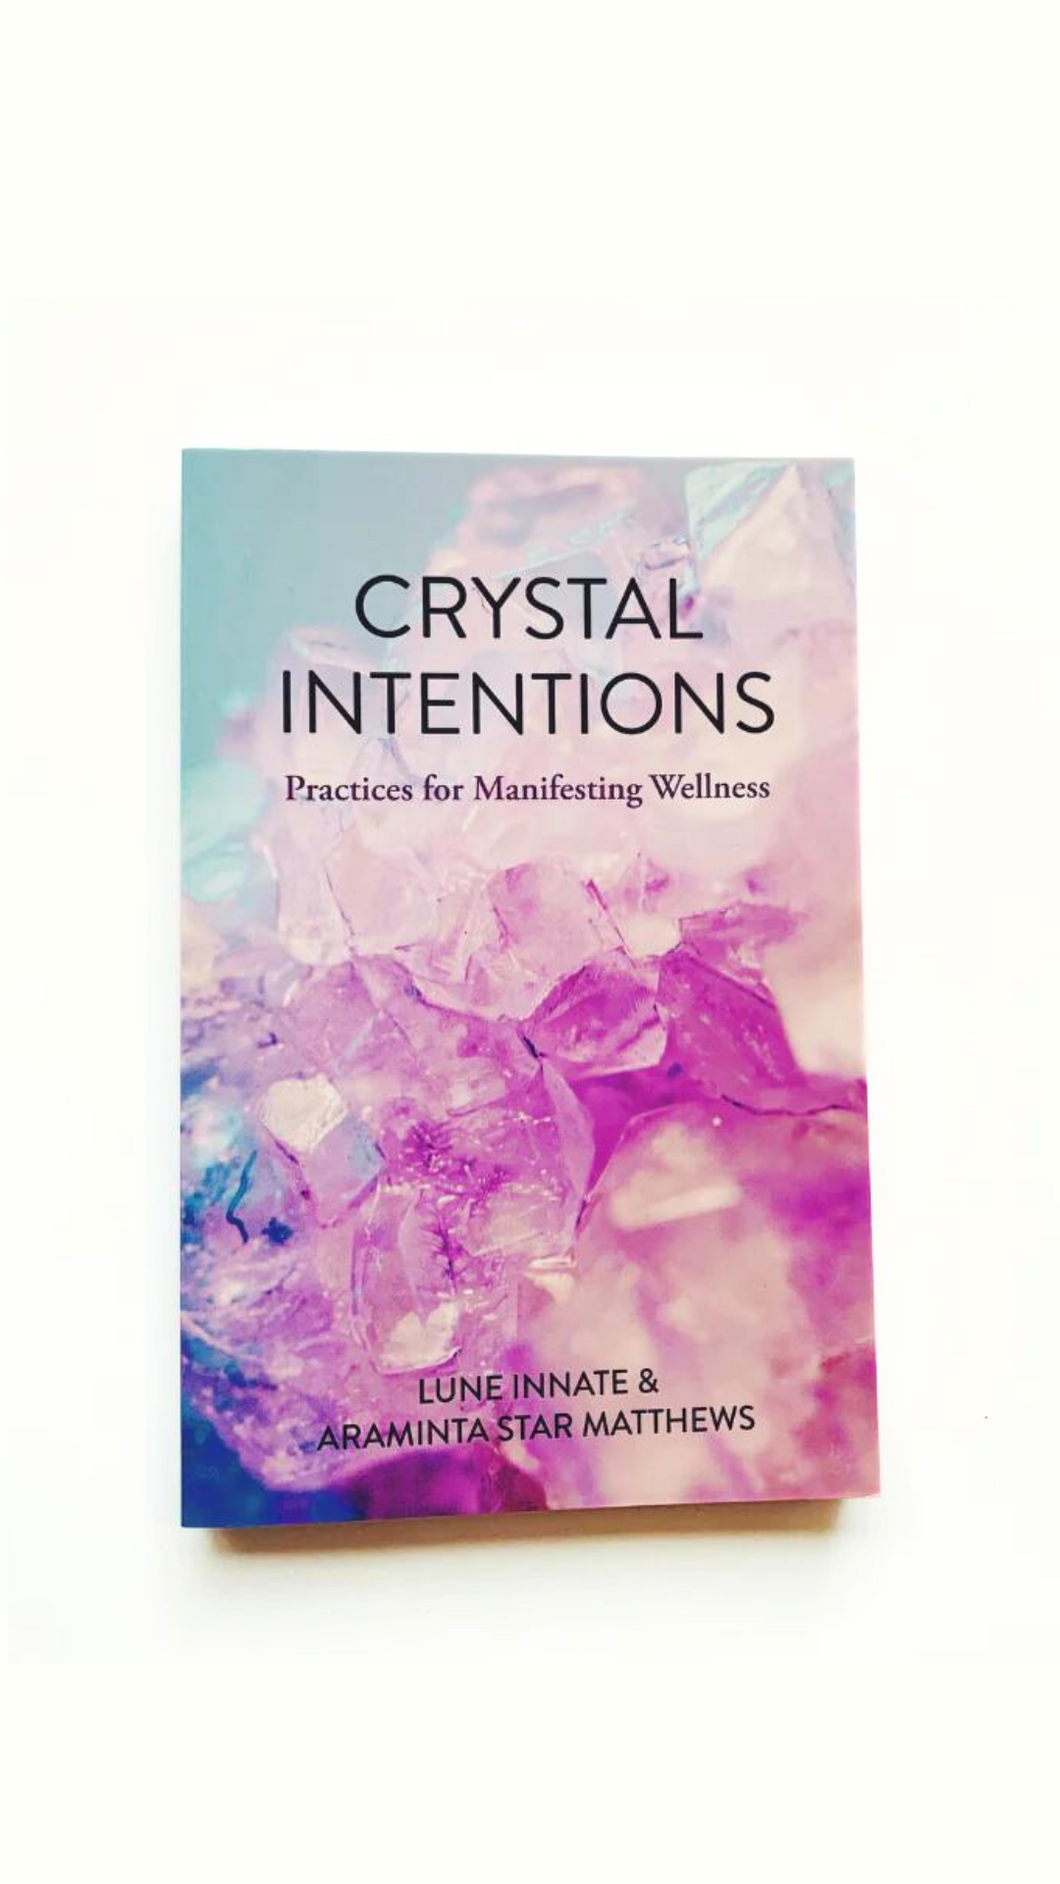 Crystal intentions book cover